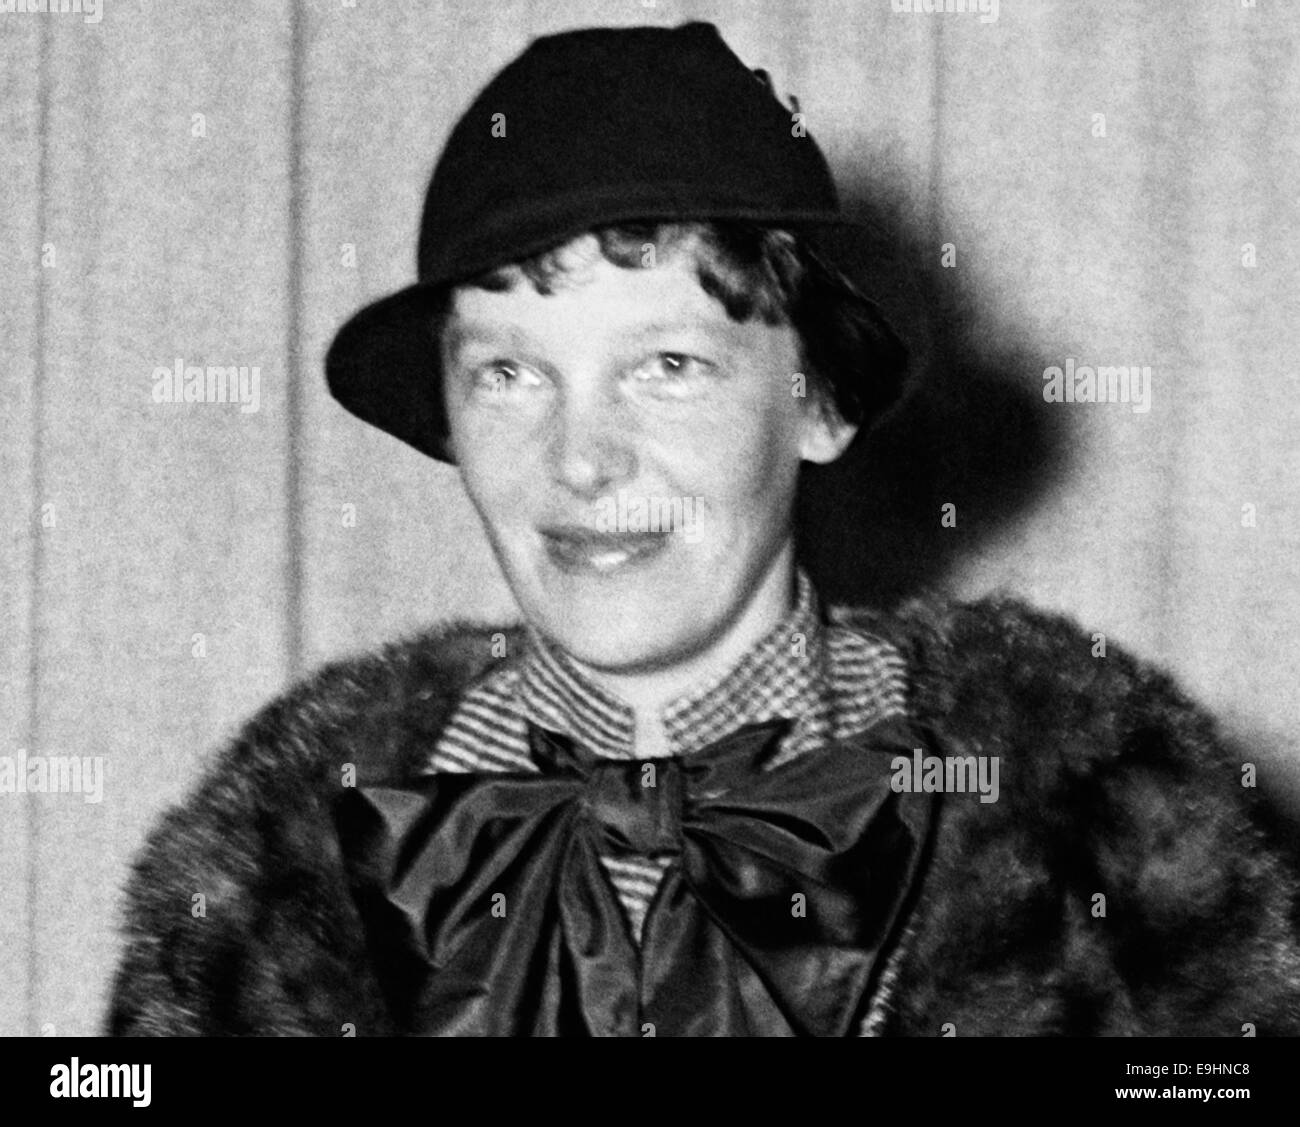 Vintage photo of American aviation pioneer and author Amelia Earhart (1897 – declared dead 1939) – Earhart and her navigator Fred Noonan famously vanished in 1937 while she was trying to become the first female to complete a circumnavigational flight of the globe. Photo taken in 1935. Stock Photo